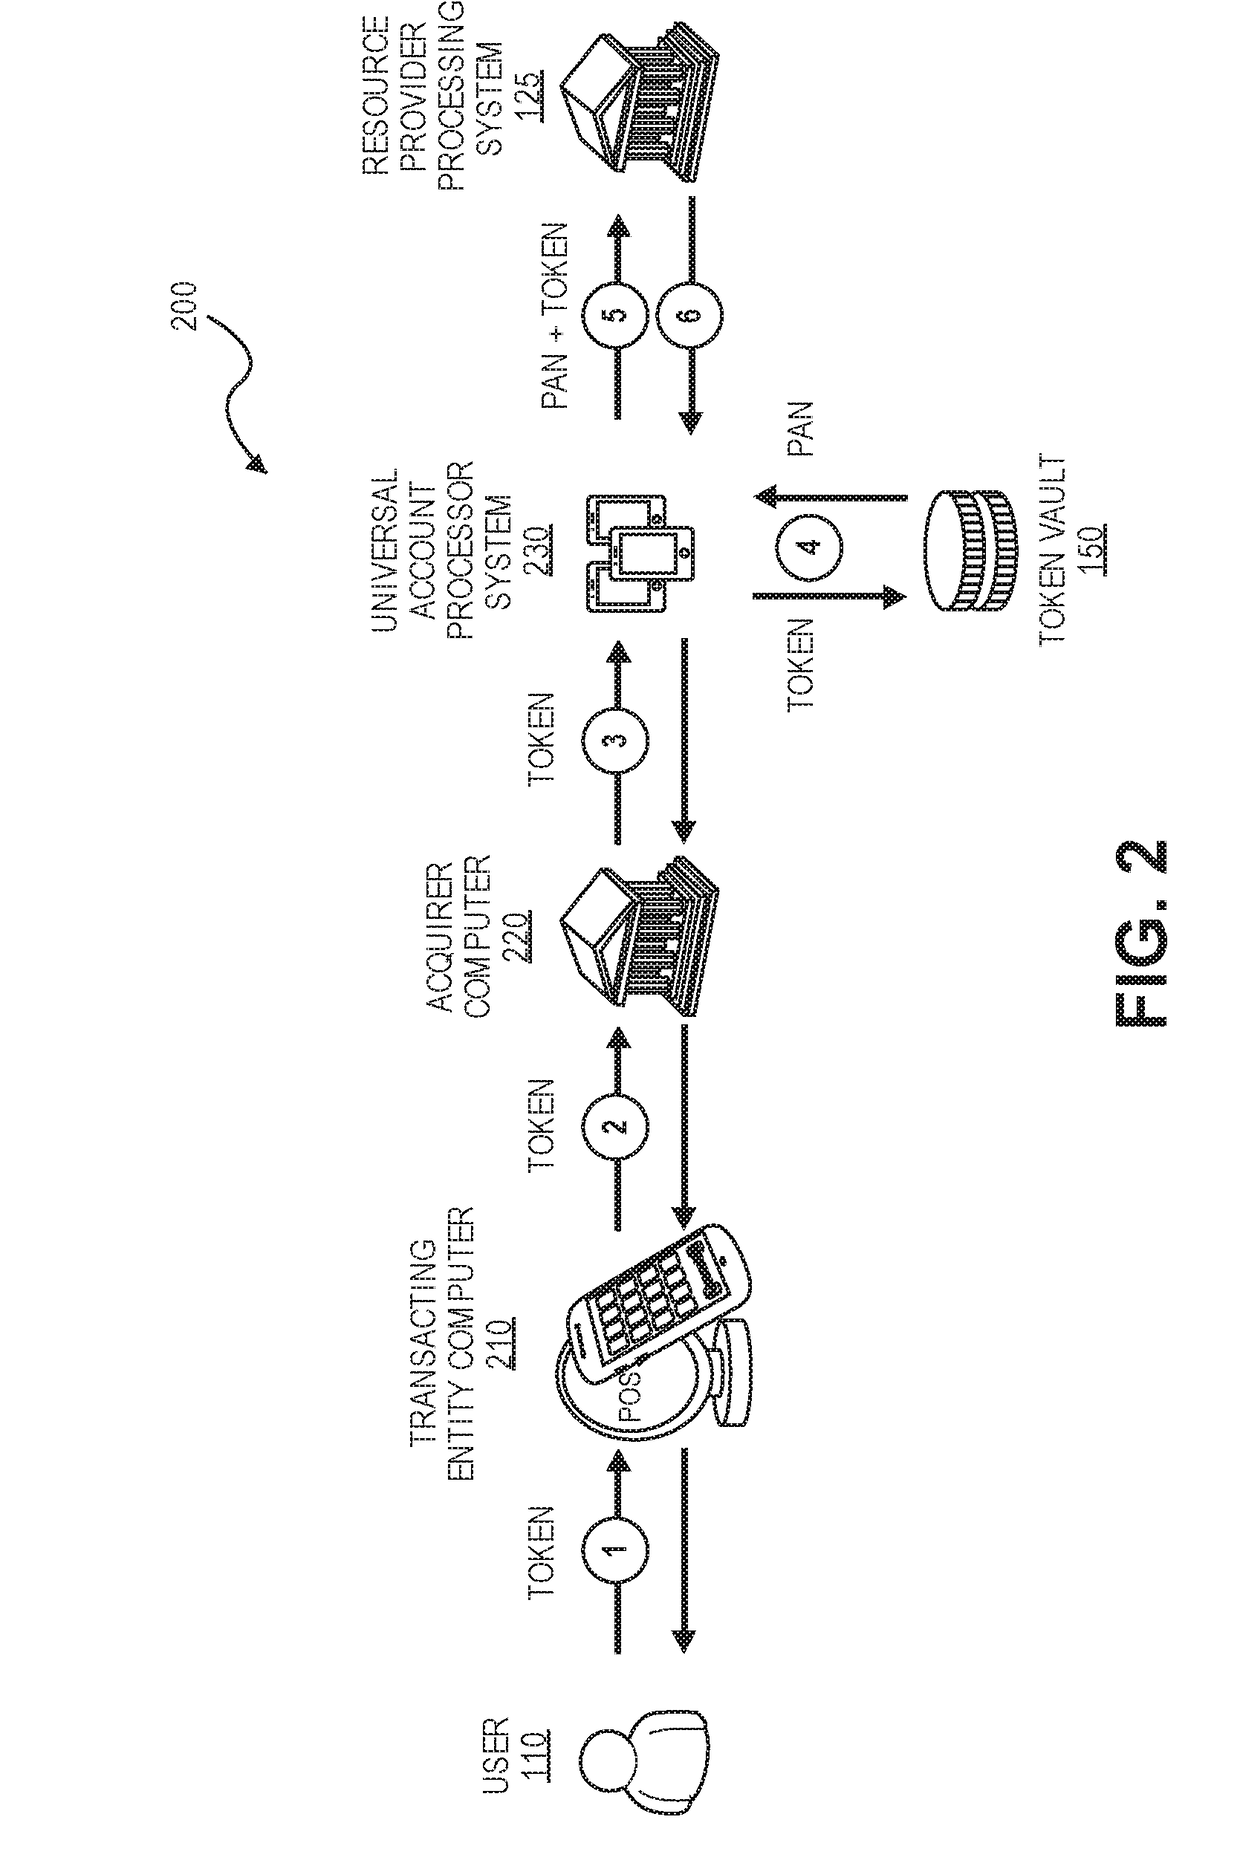 Resource provider account token provisioning and processing